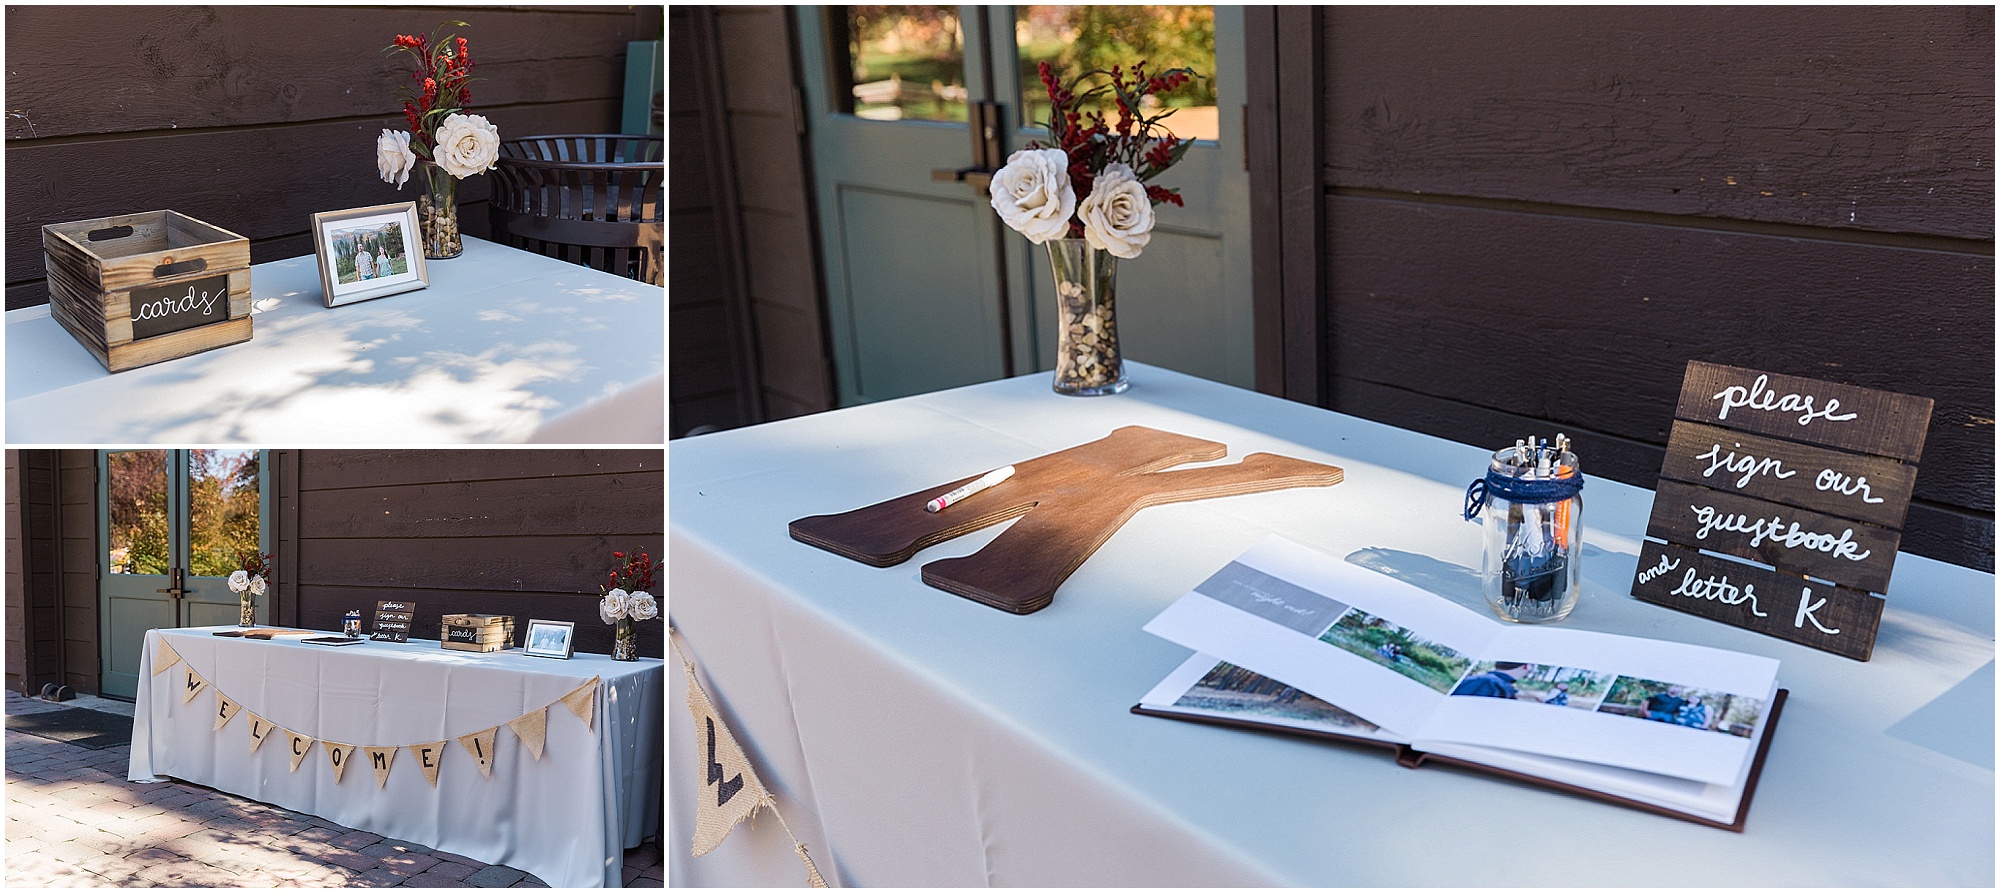 The guest book waits to be signed at a beautiful outdoor wedding at Hollinshead Barn in Bend, OR. | Erica Swantek Photography